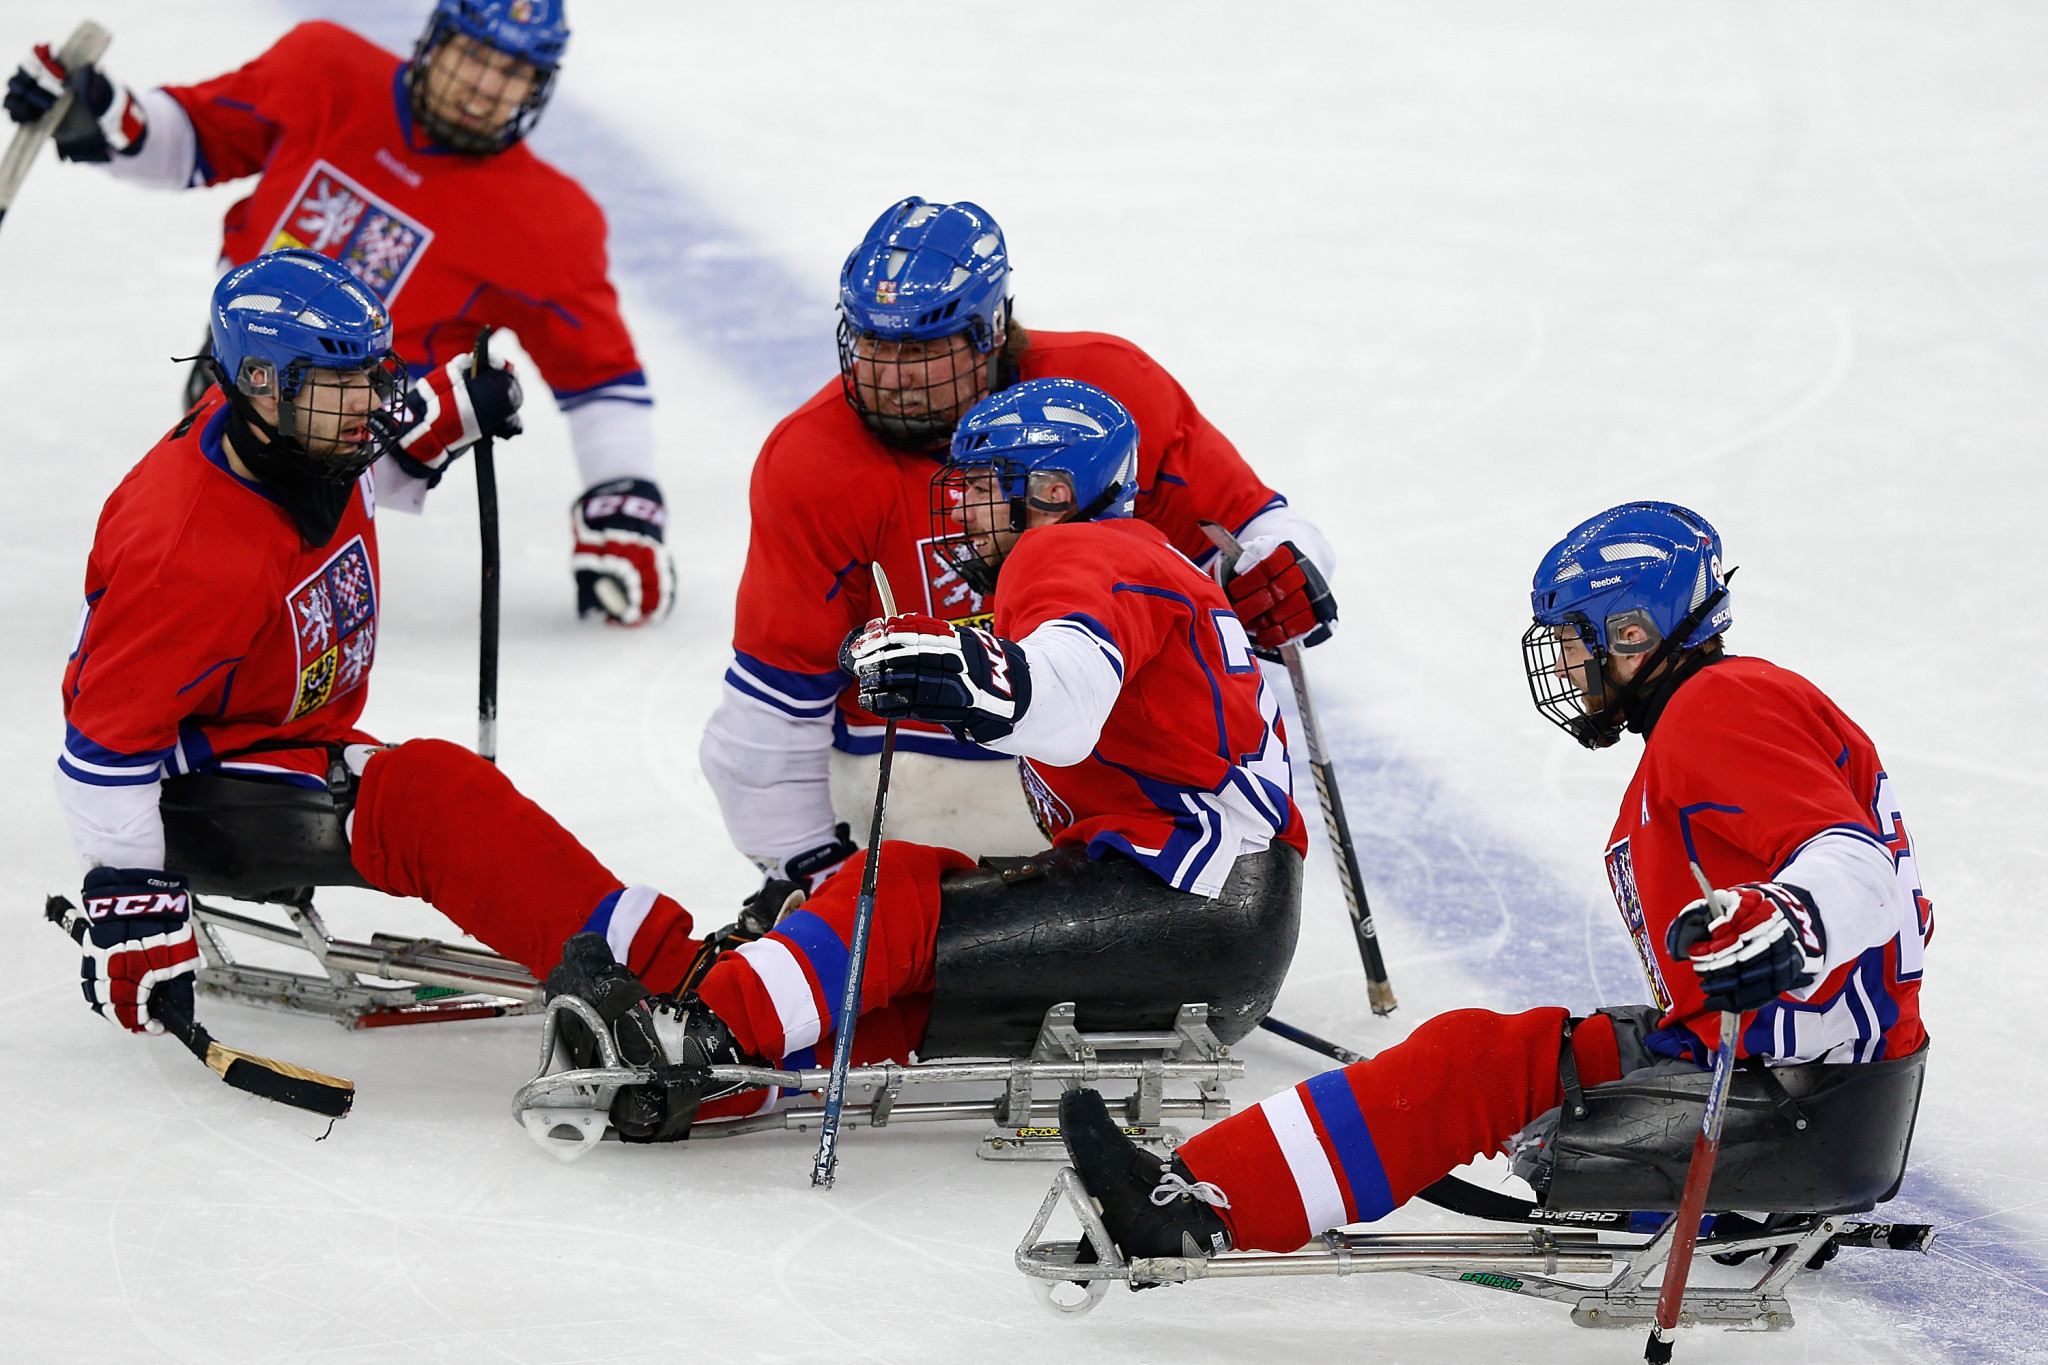 The Czech Republic finished fifth in Para ice hockey at the Vancouver 2010 and Sochi 2014 Winter Paralympics, and sixth at Pyeongchang 2018 ©Getty Images